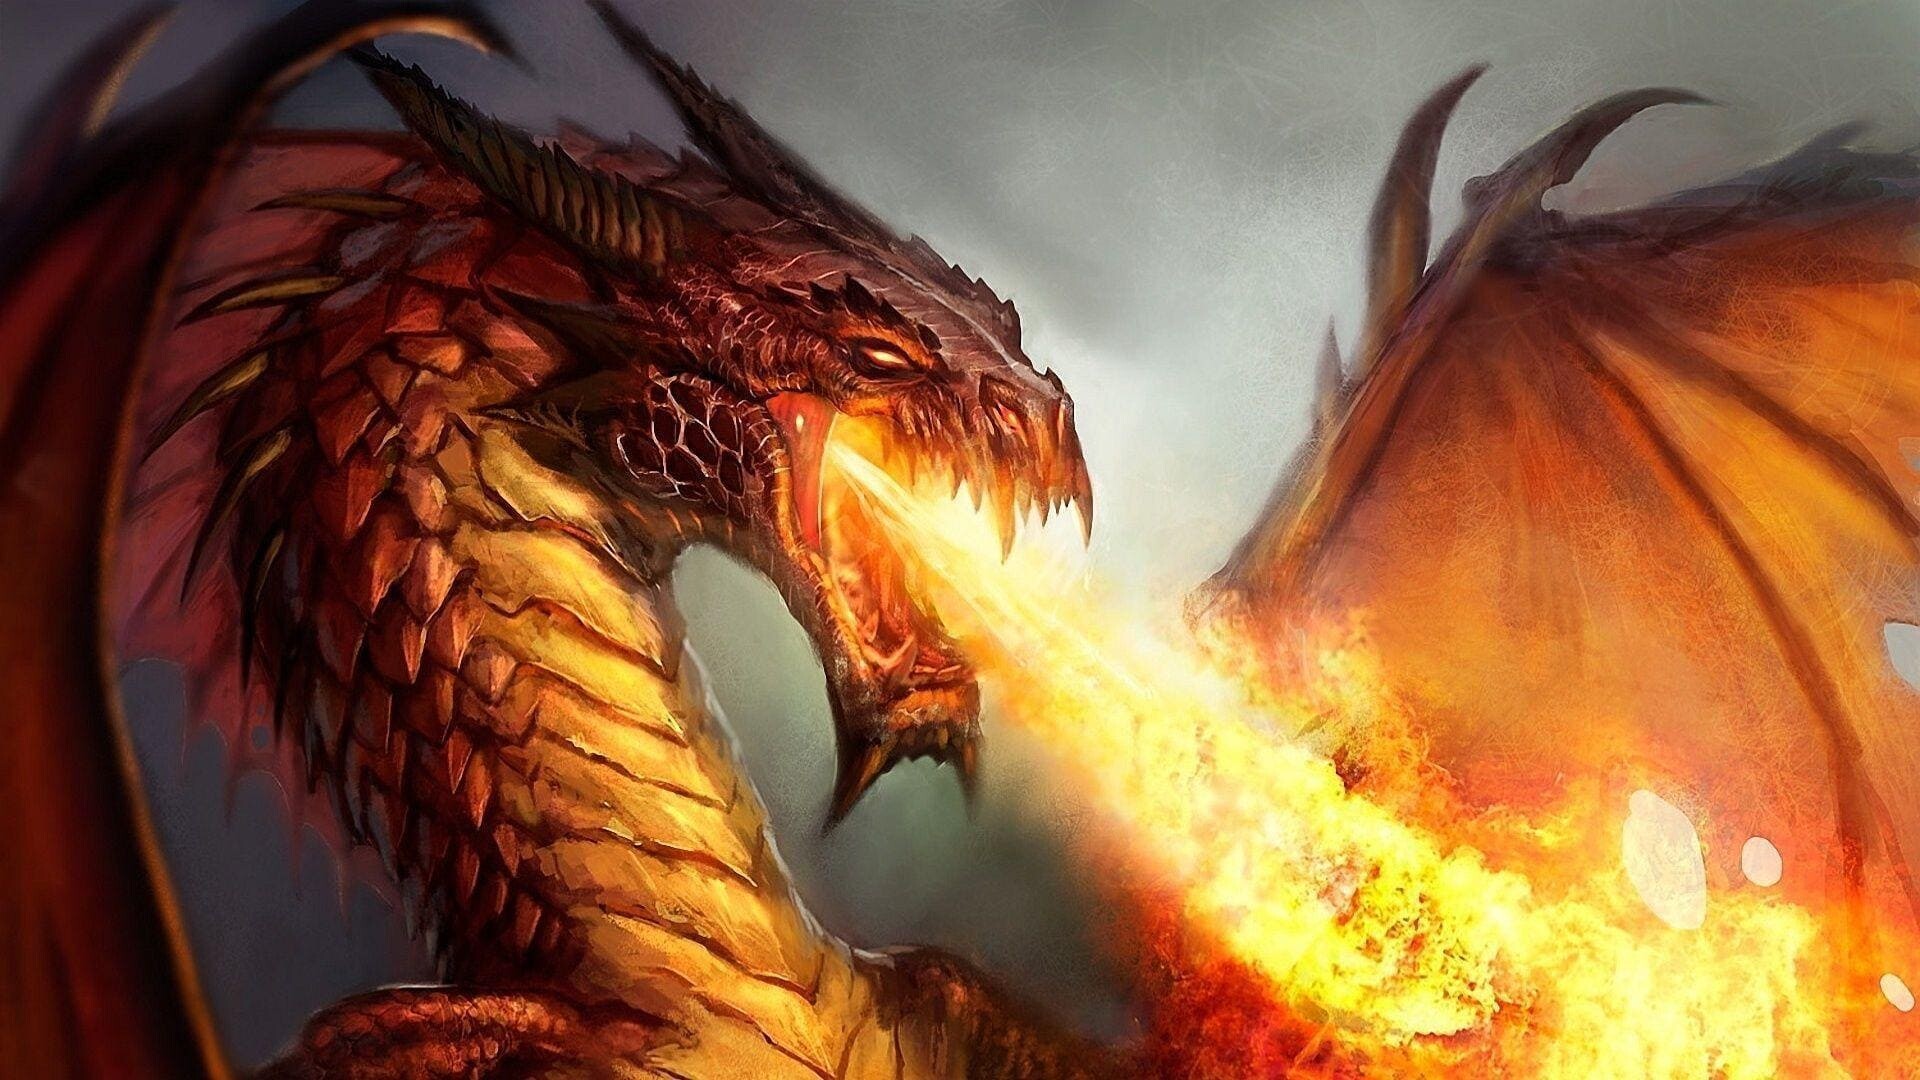 Dragon: Fire-breathing monster, Ability to shoot fire from its mouth. 1920x1080 Full HD Wallpaper.